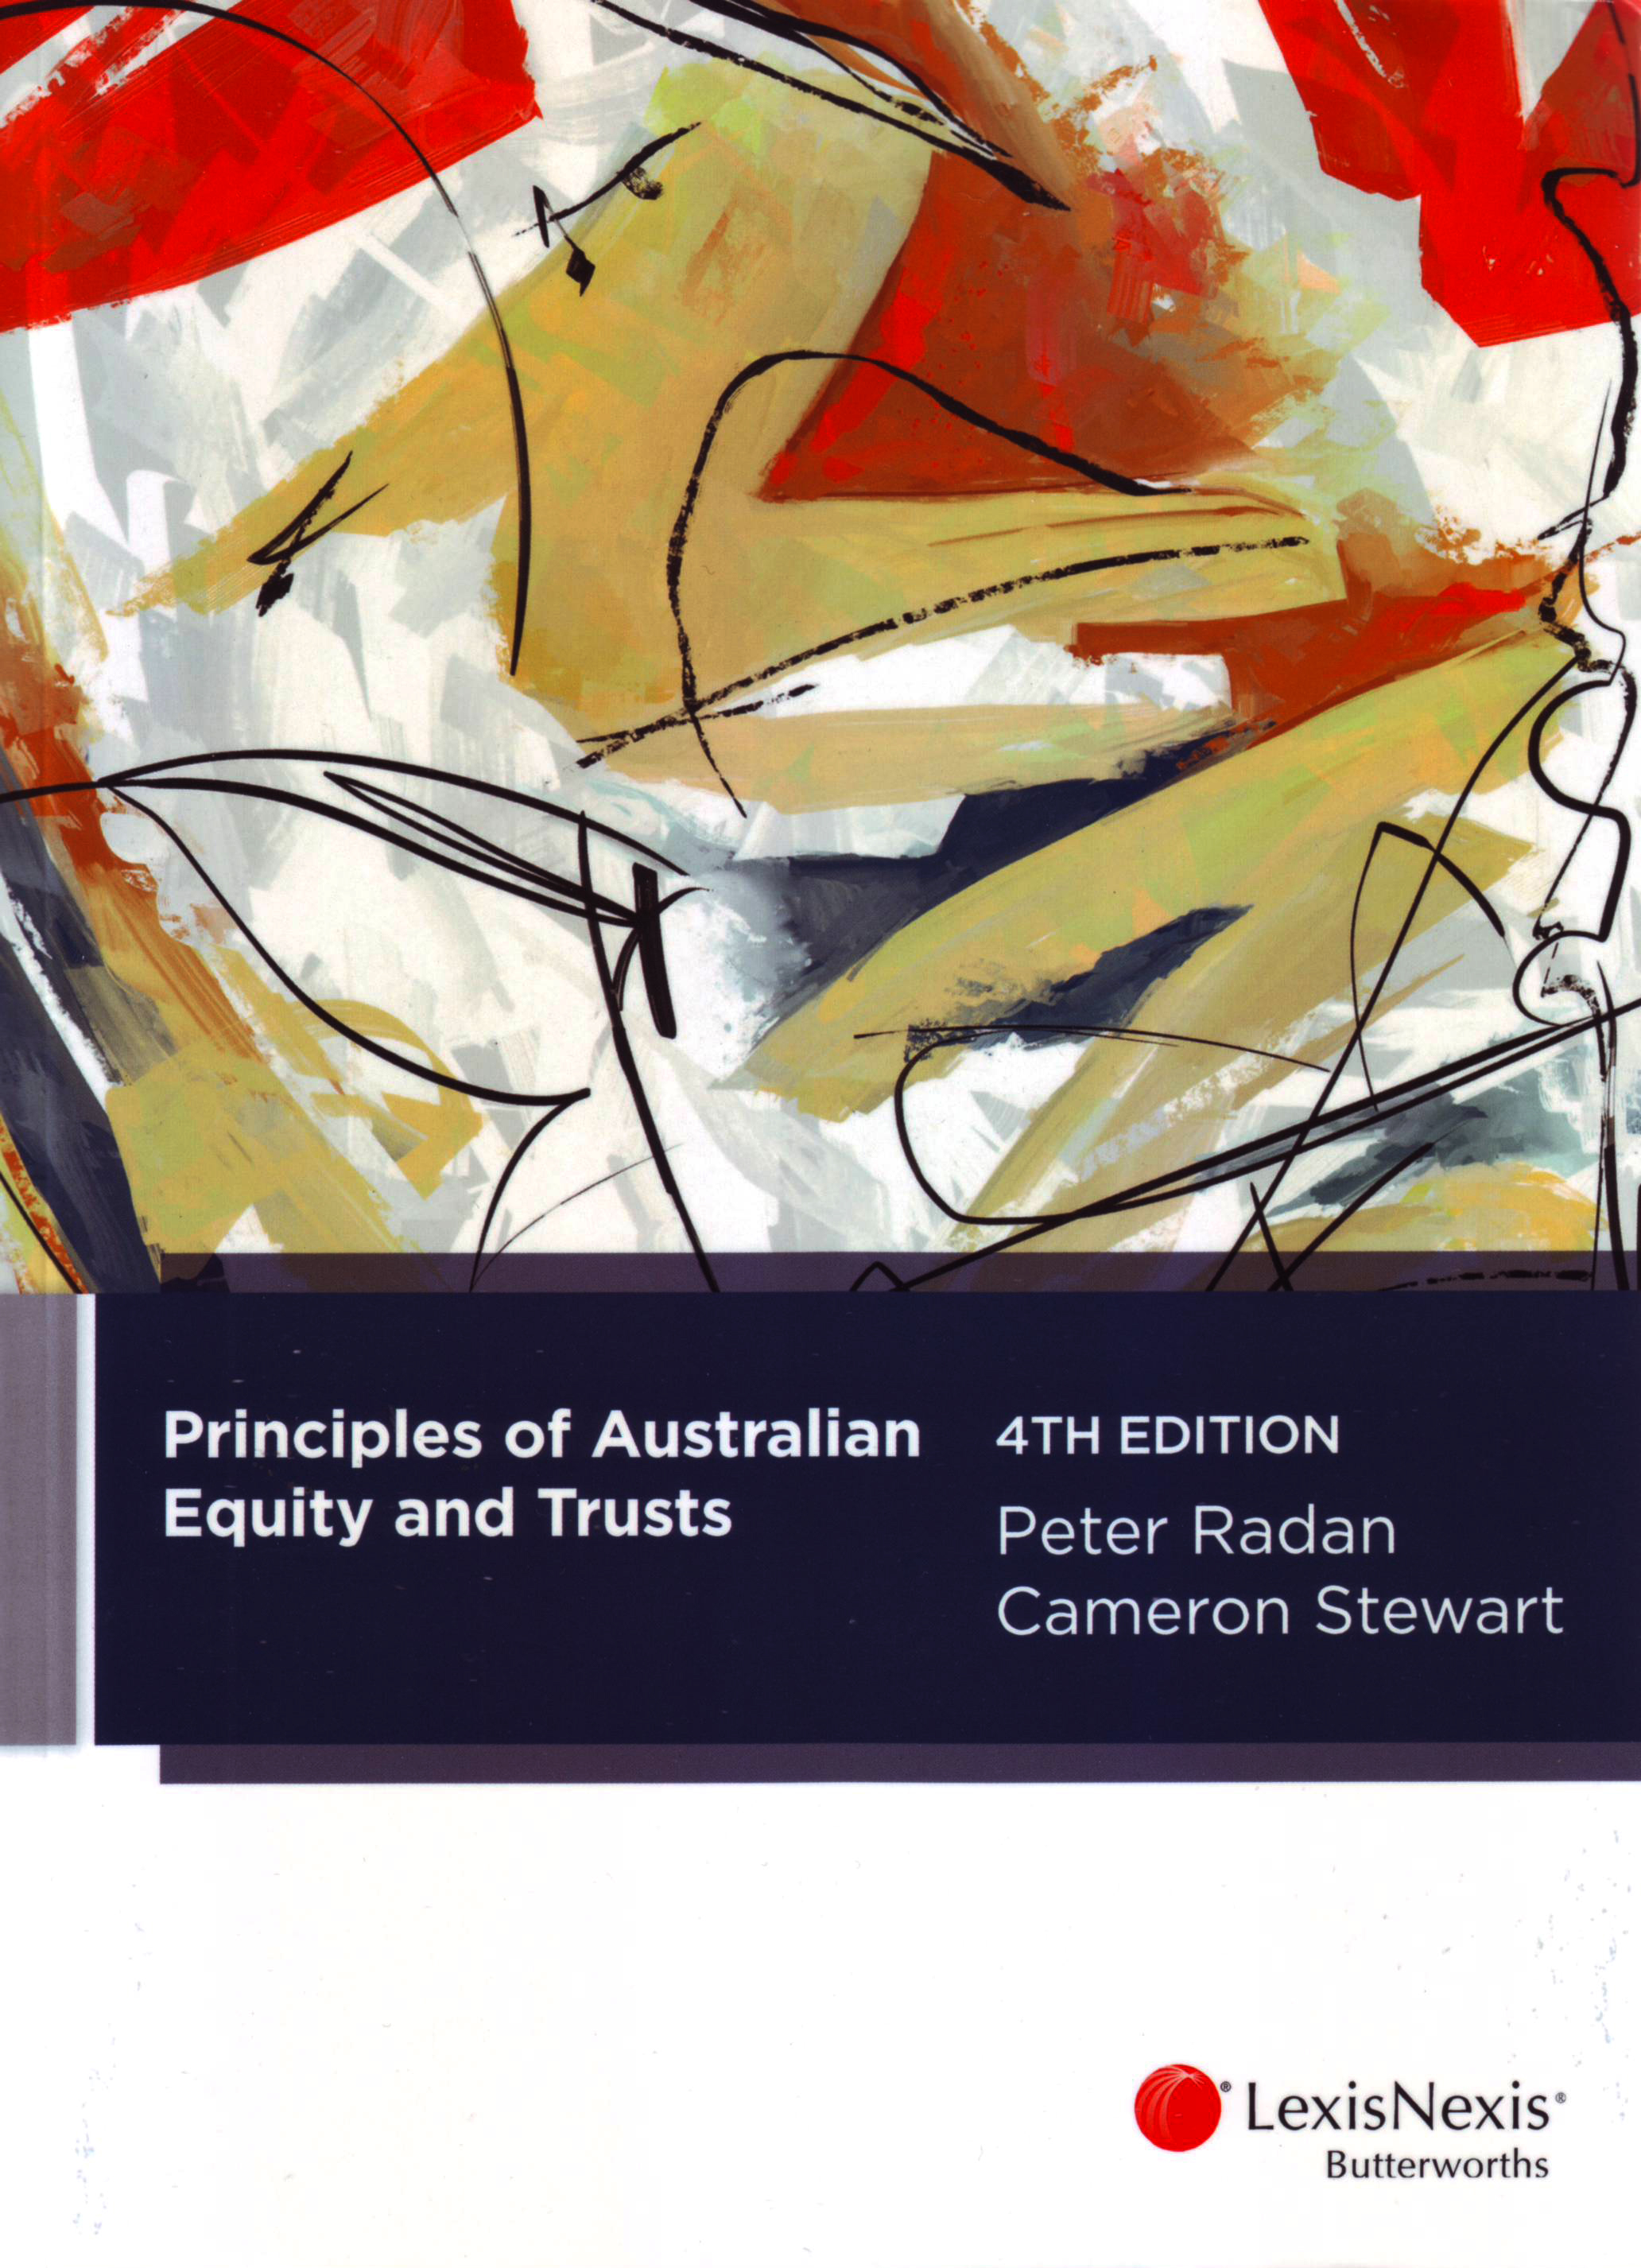 Principles of Australian Equity and Trusts, 4th edition